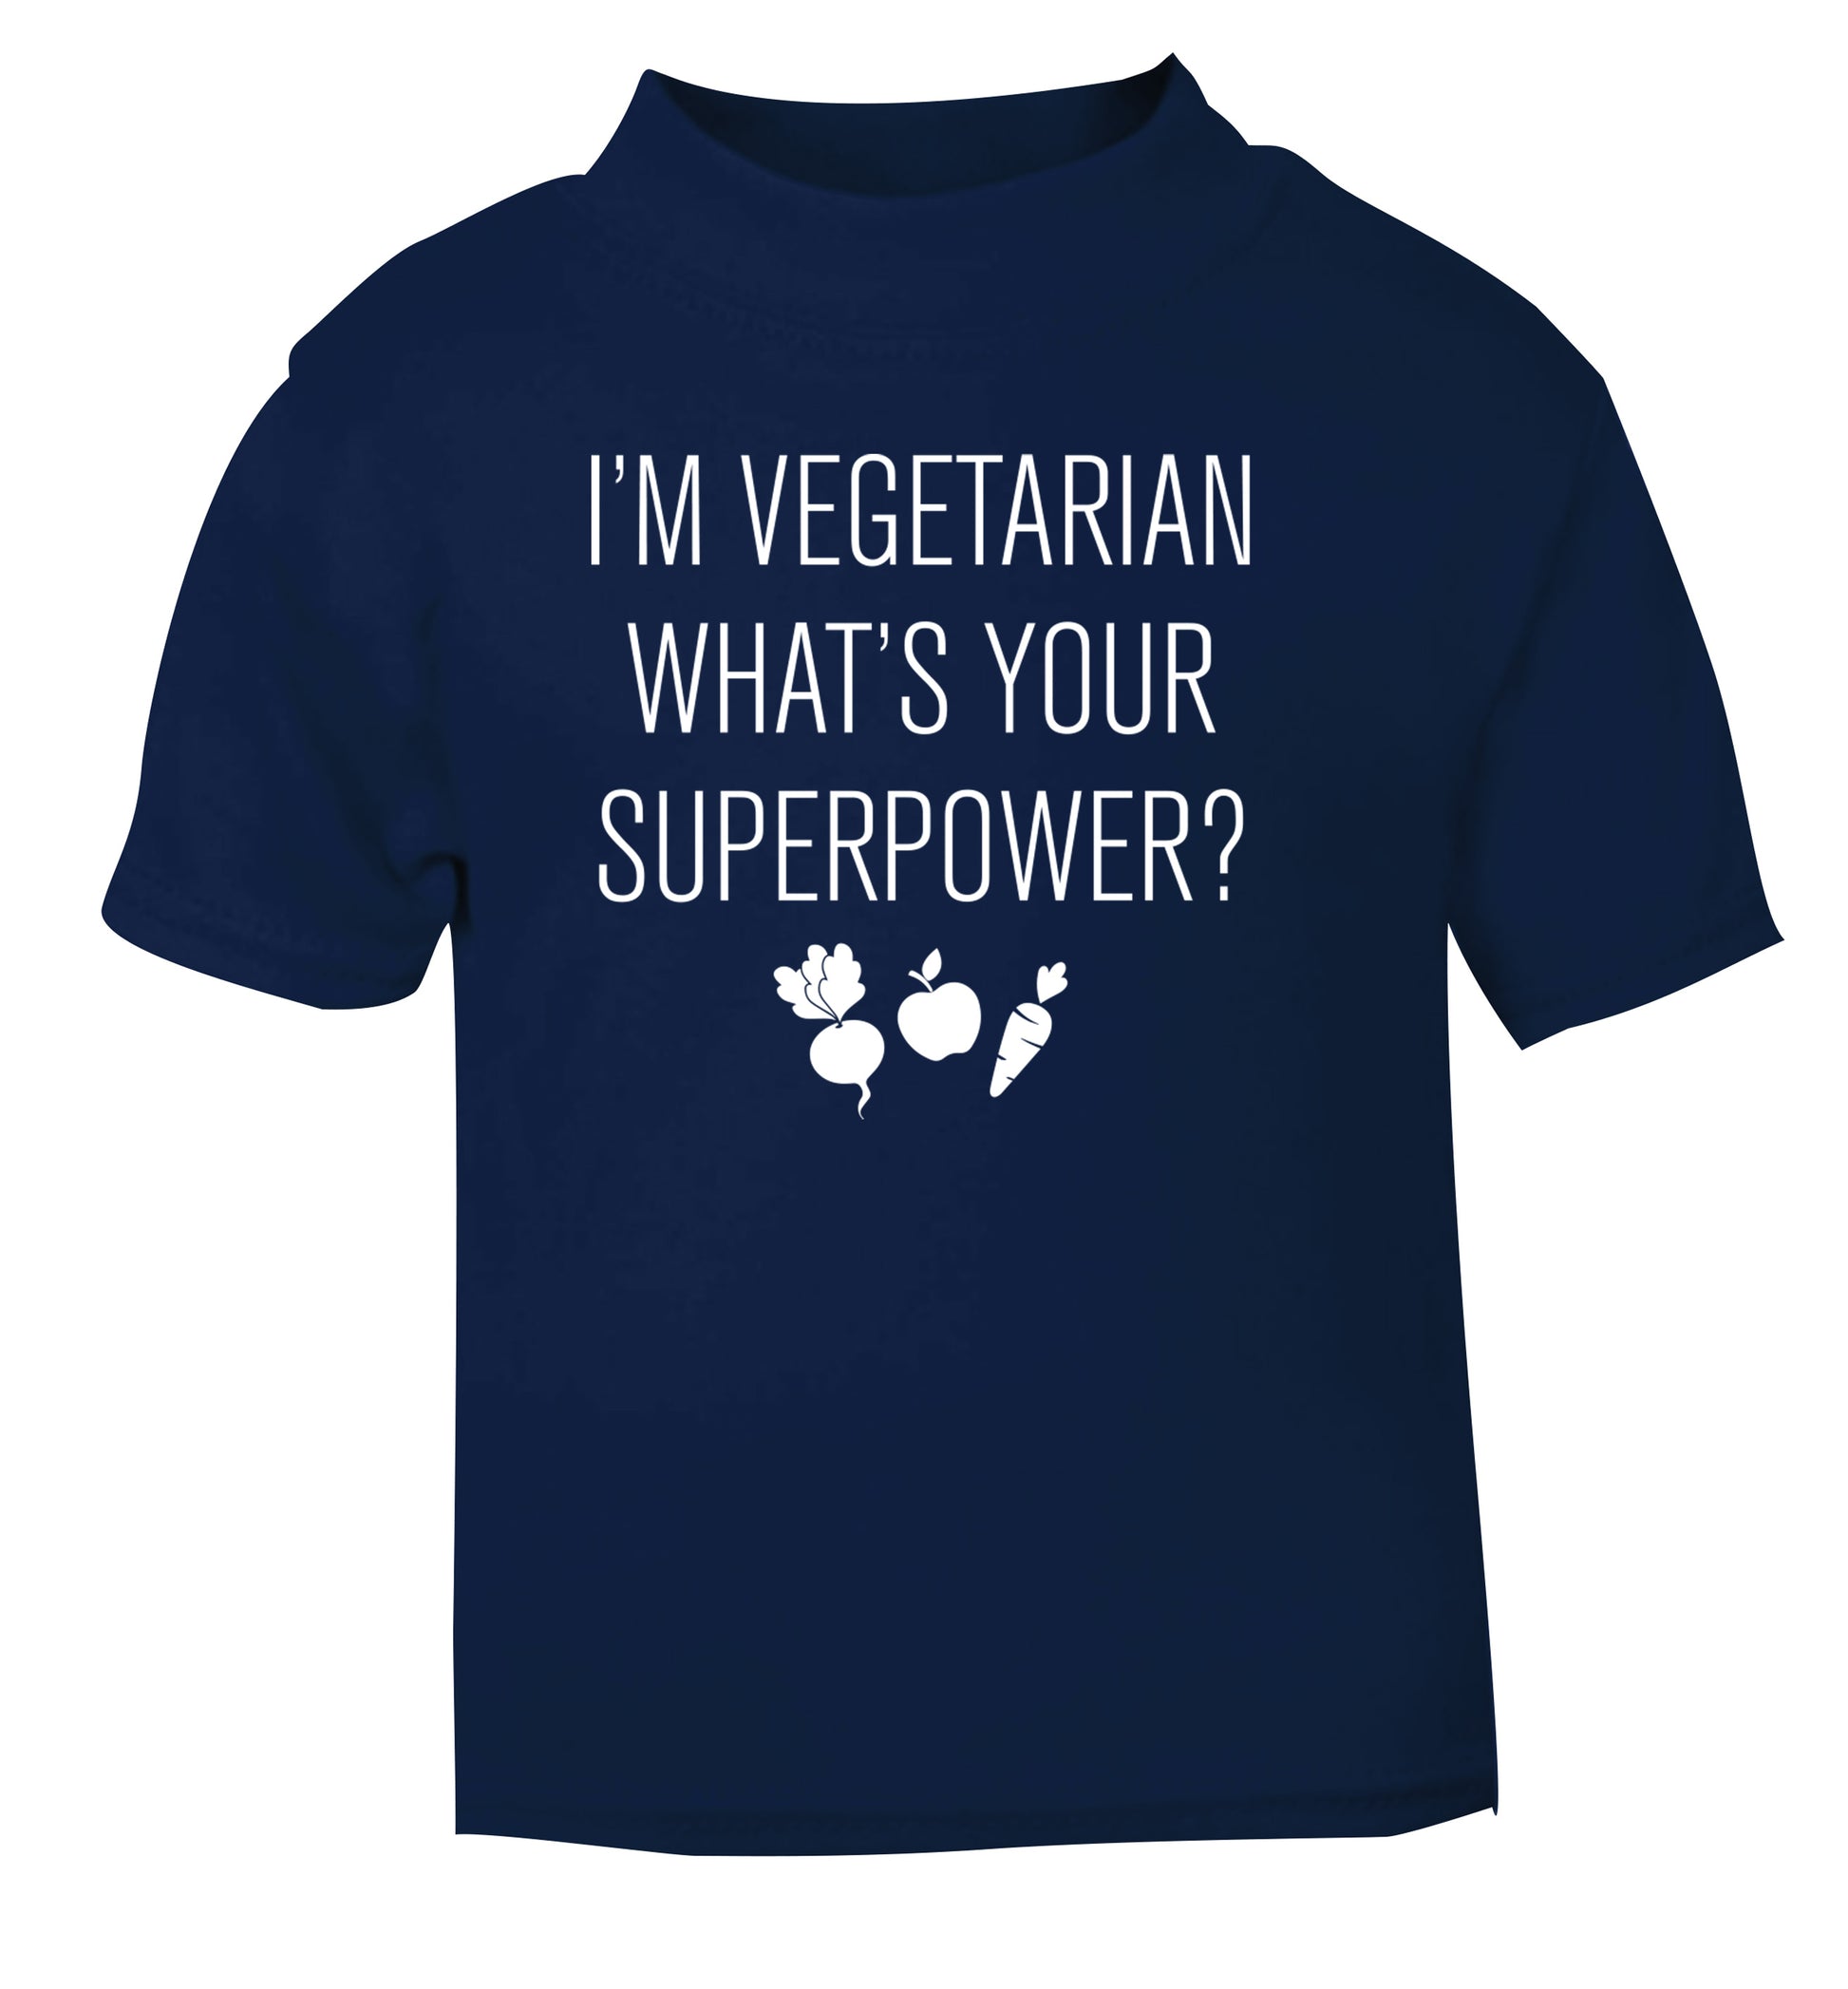 I'm vegetarian what's your superpower? navy Baby Toddler Tshirt 2 Years